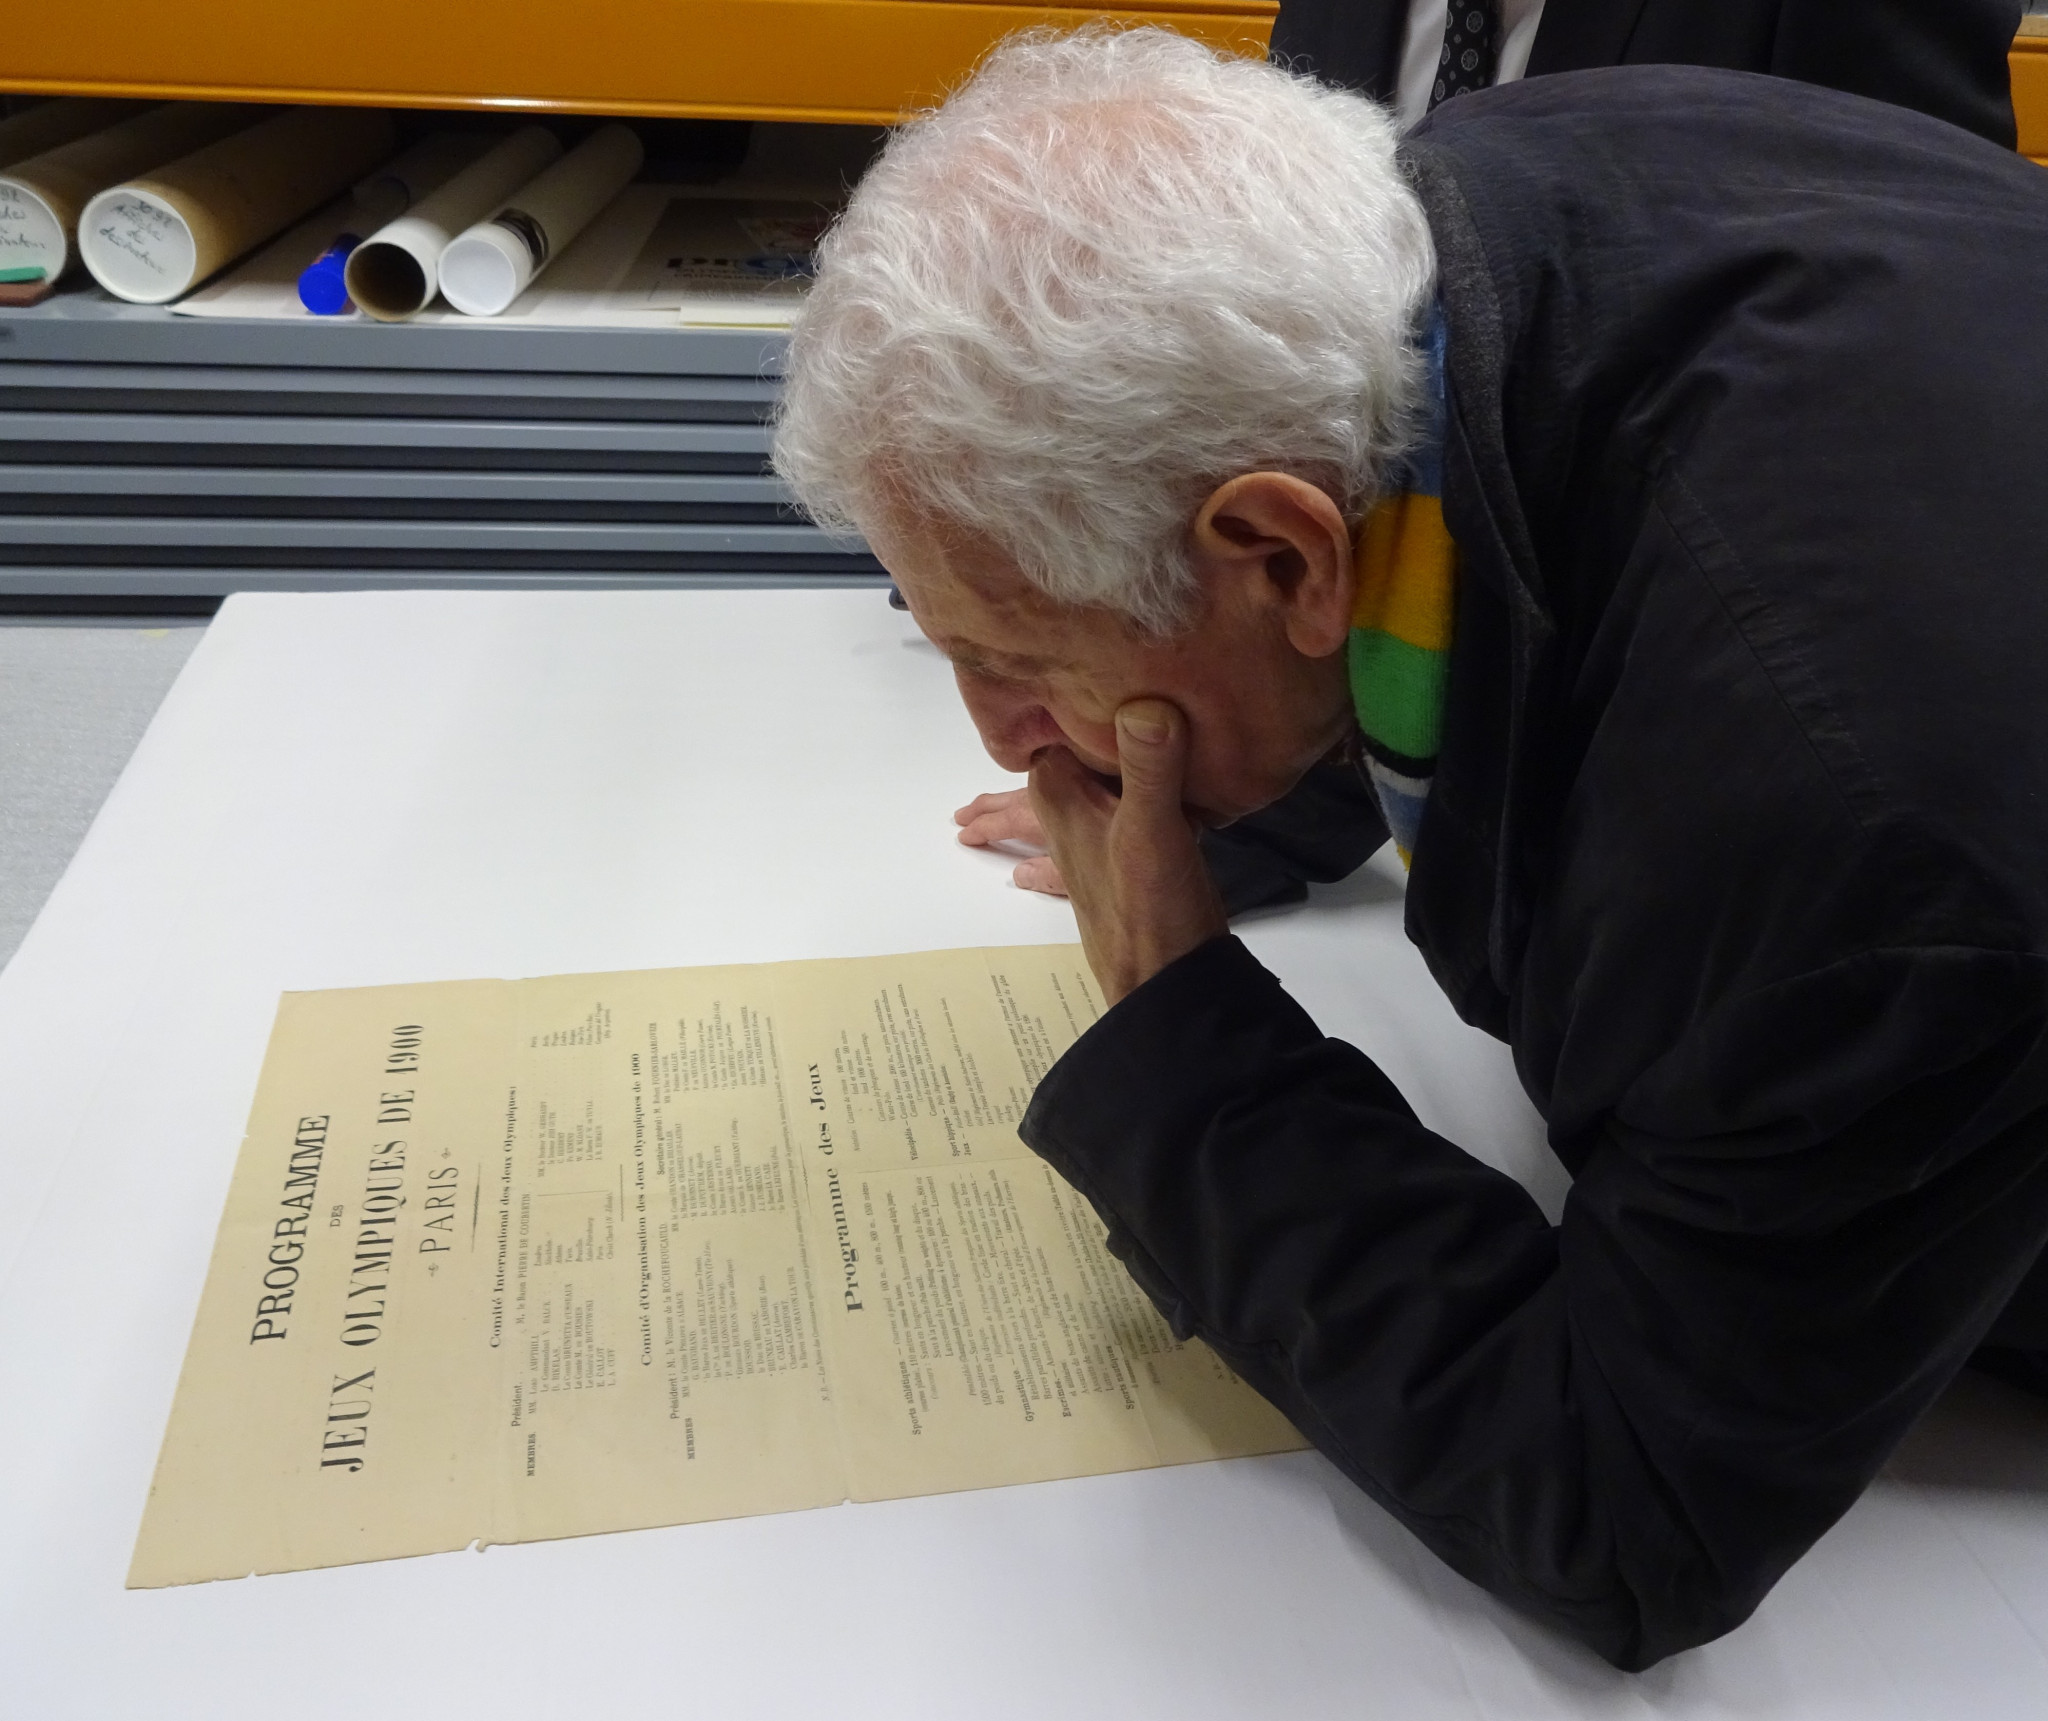 French historian Jean Durry studies the document showing that Pierre de Coubertin wanted the first modern Olympics in Paris in 1900 ©Philip Barker